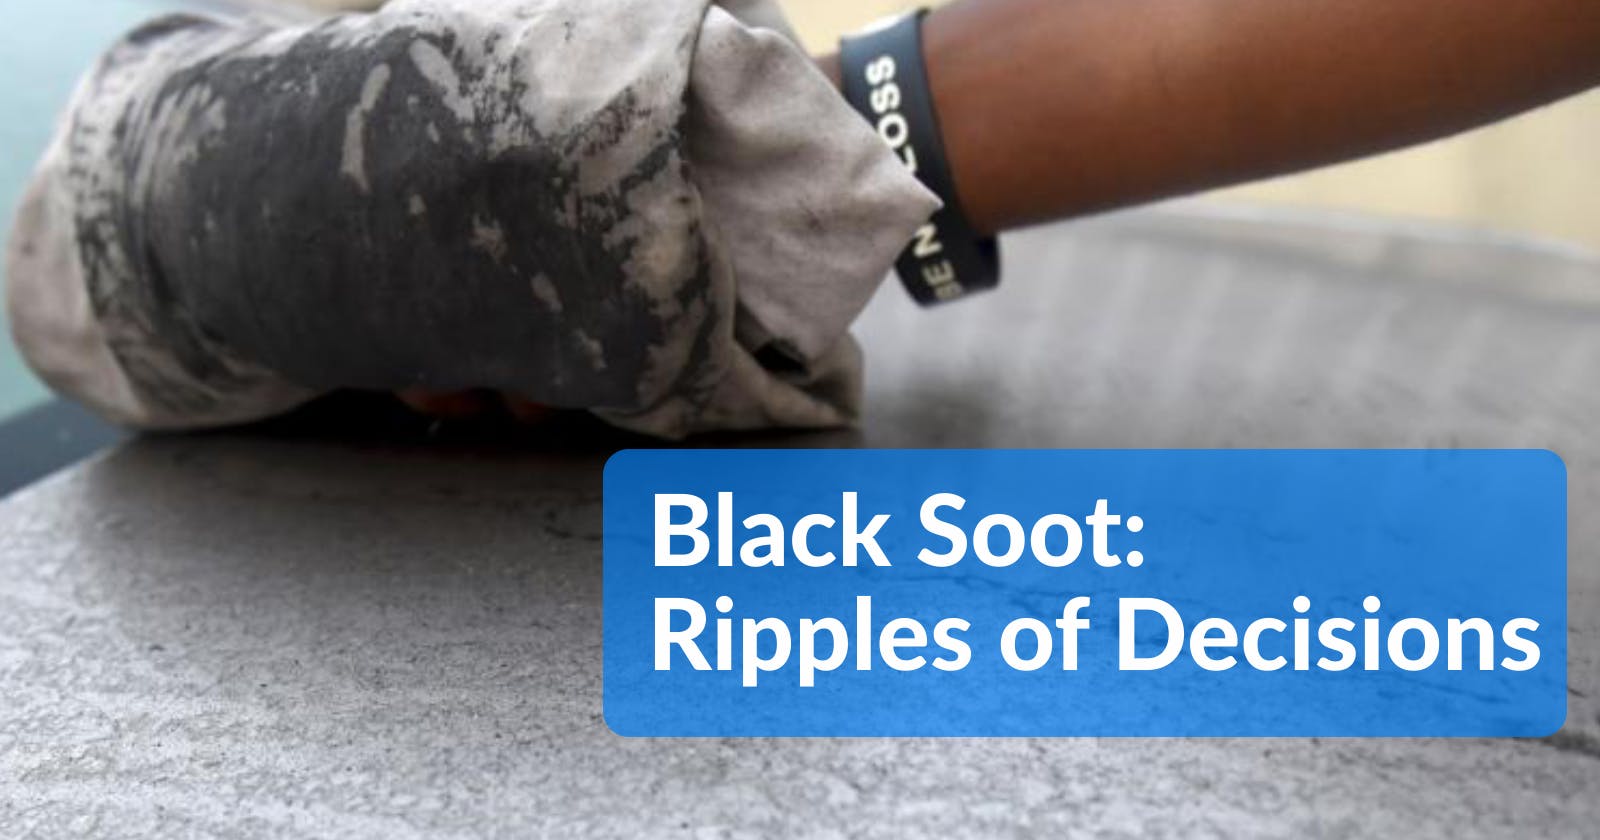 Black Soot: Ripples of Decisions